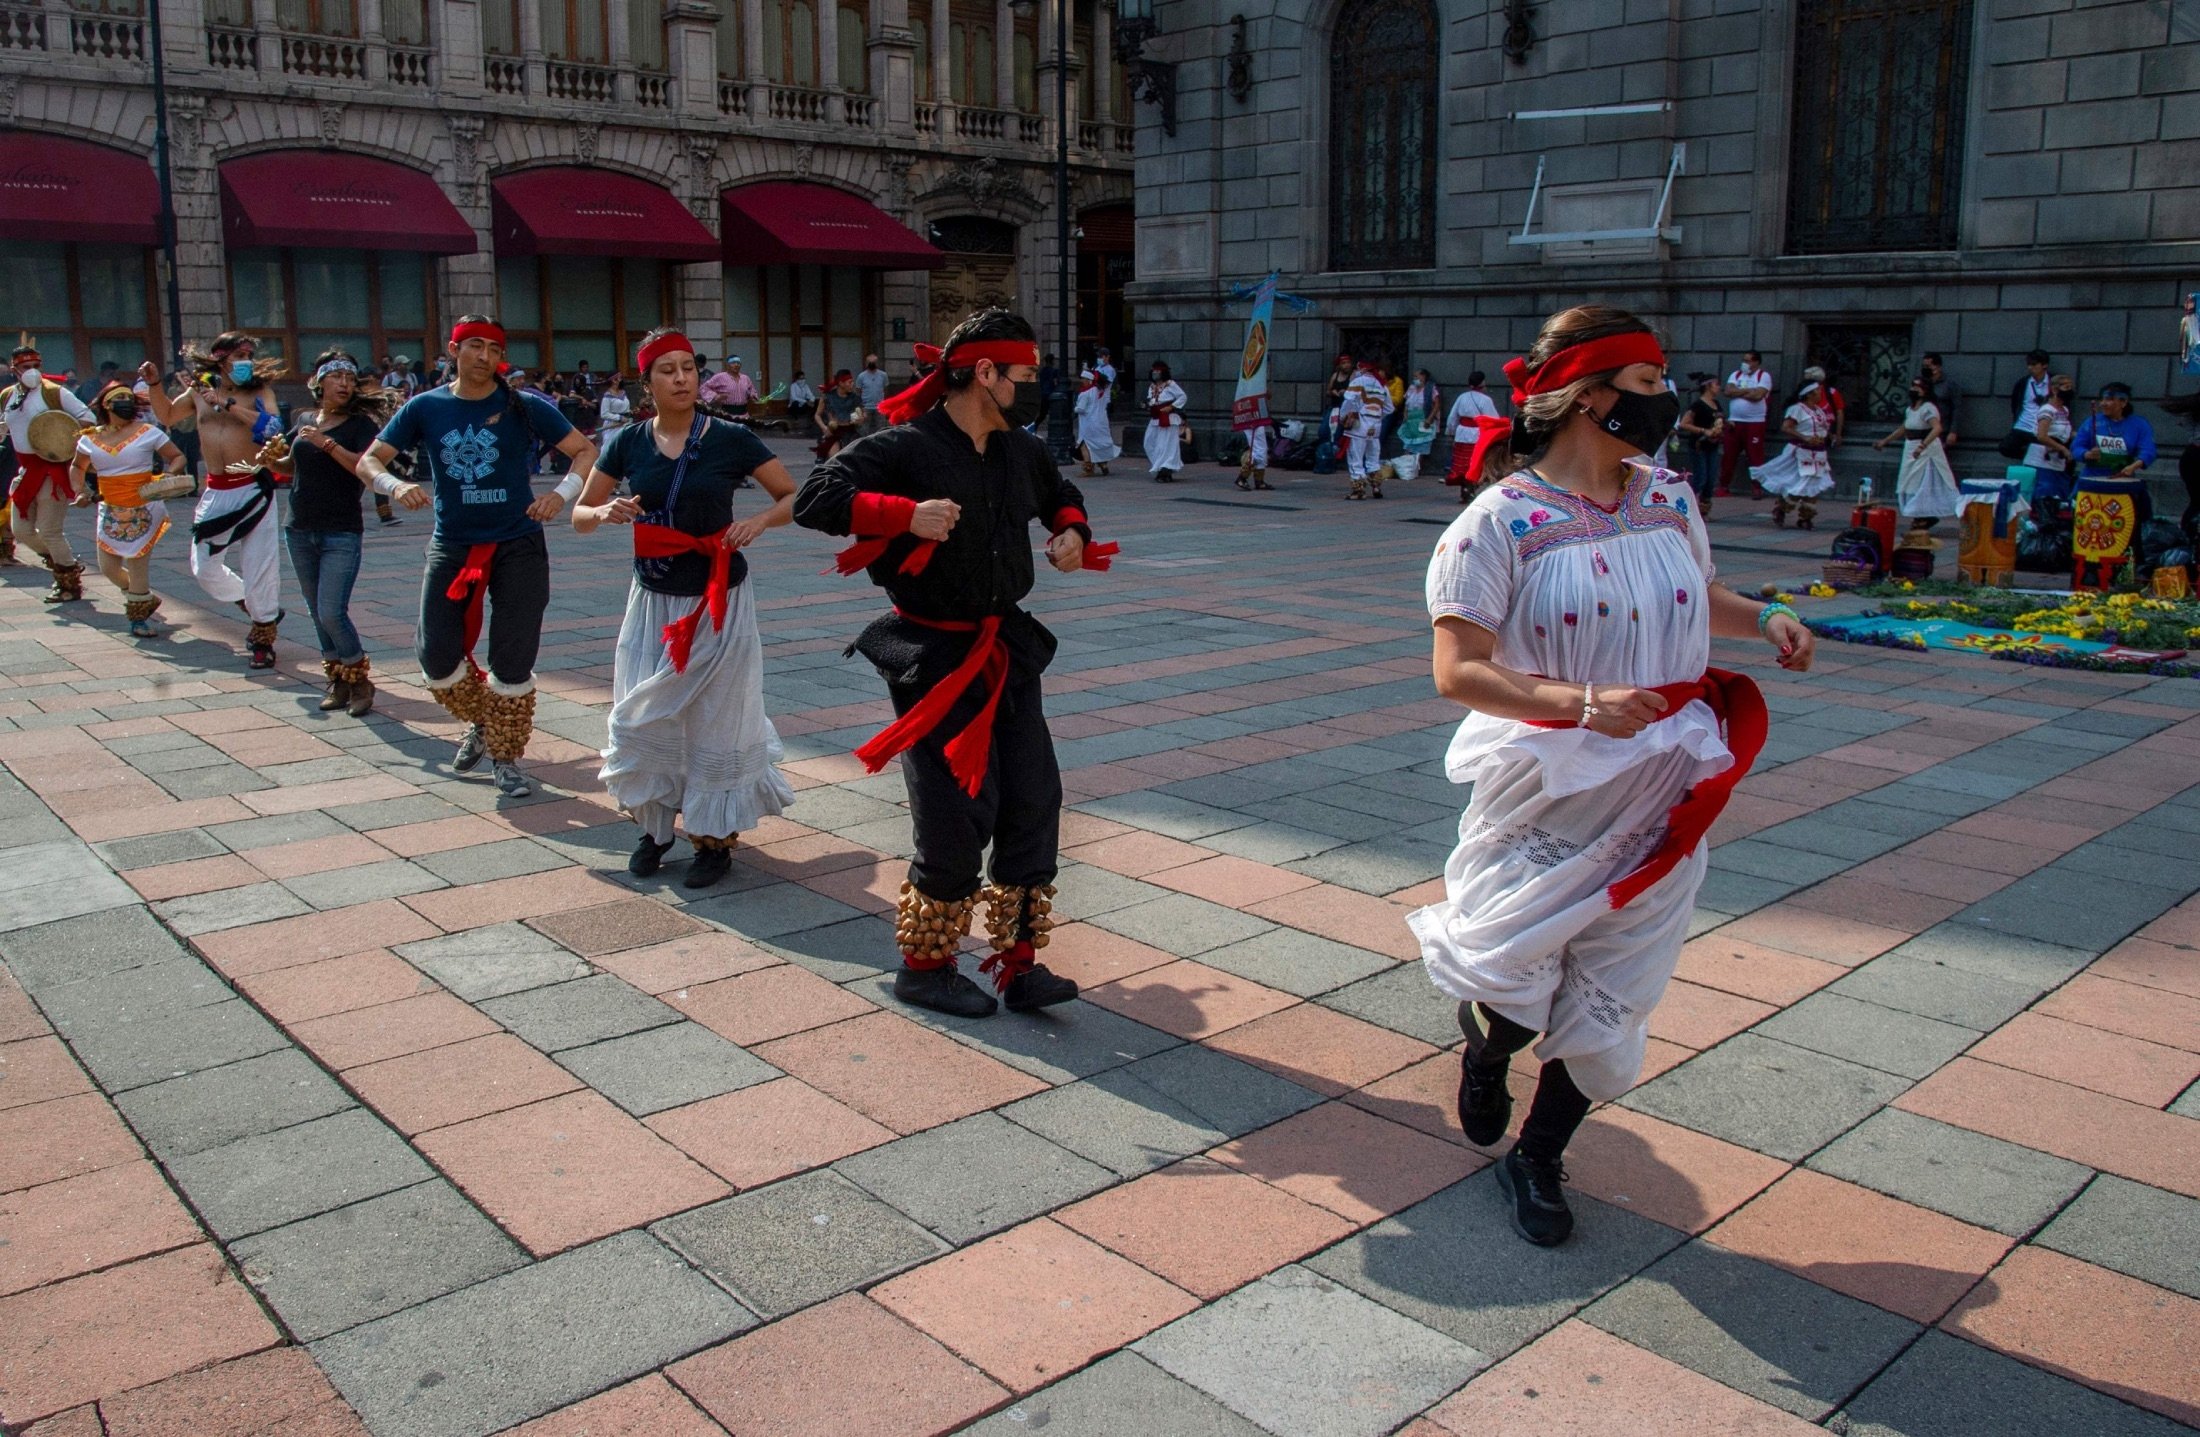 People perform an Aztec dance at the historical Center in Mexico City, Mexico, Aug. 3, 2021. (AFP Photo)